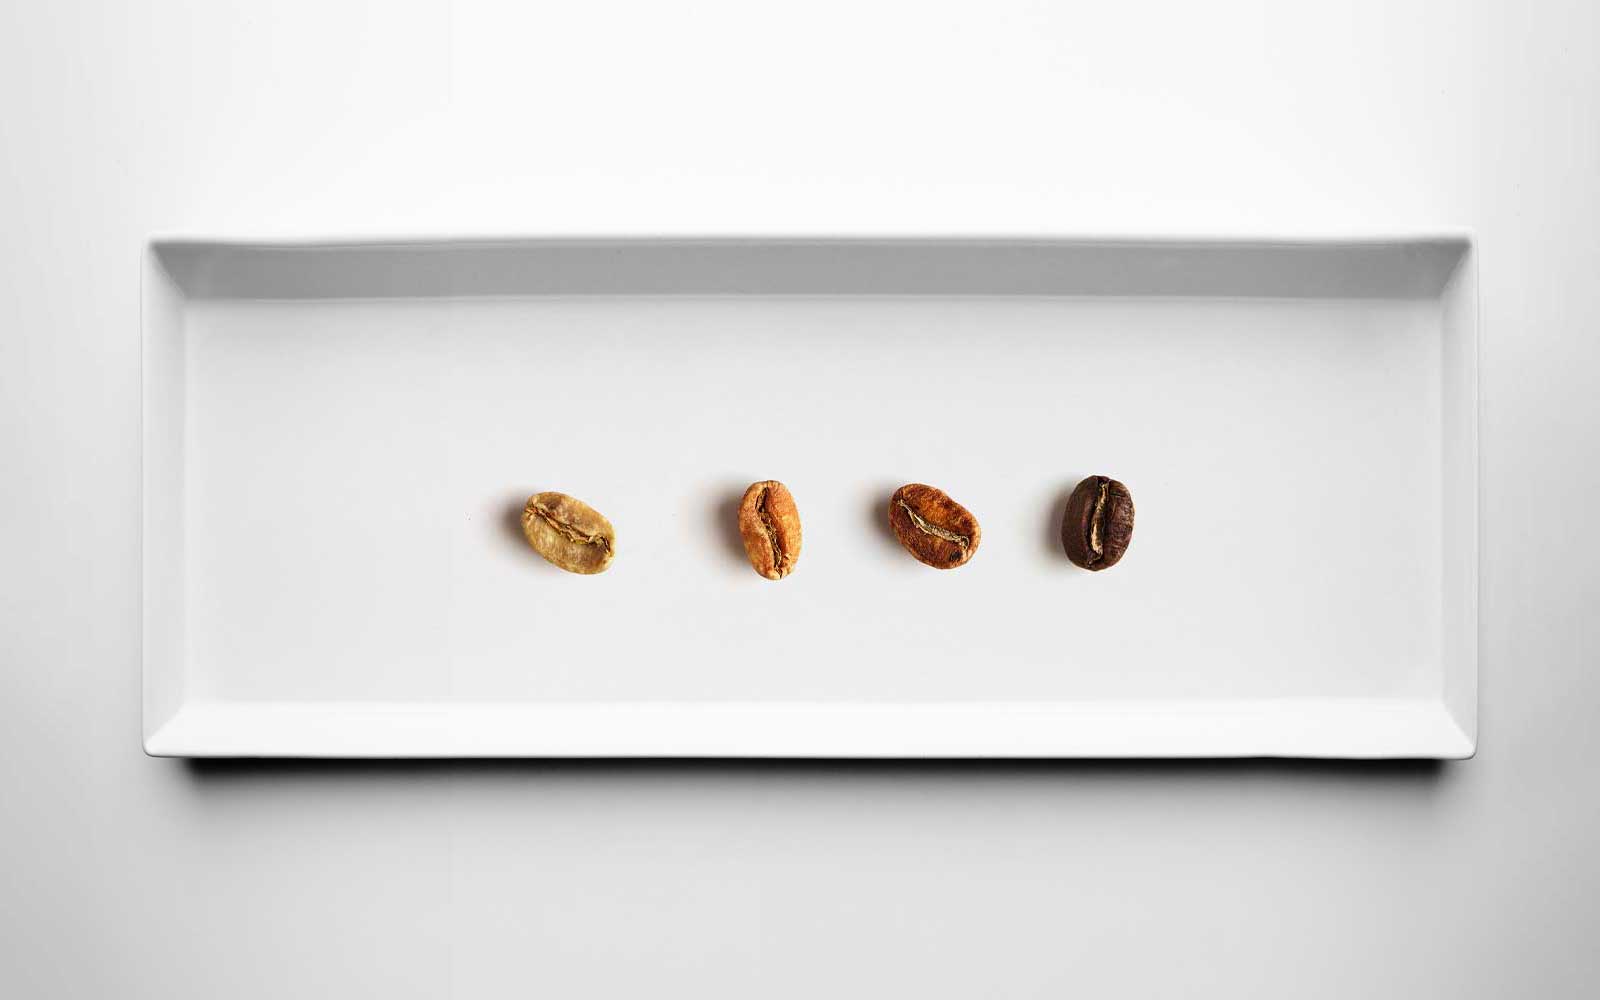 Four different grades roasting coffee beans